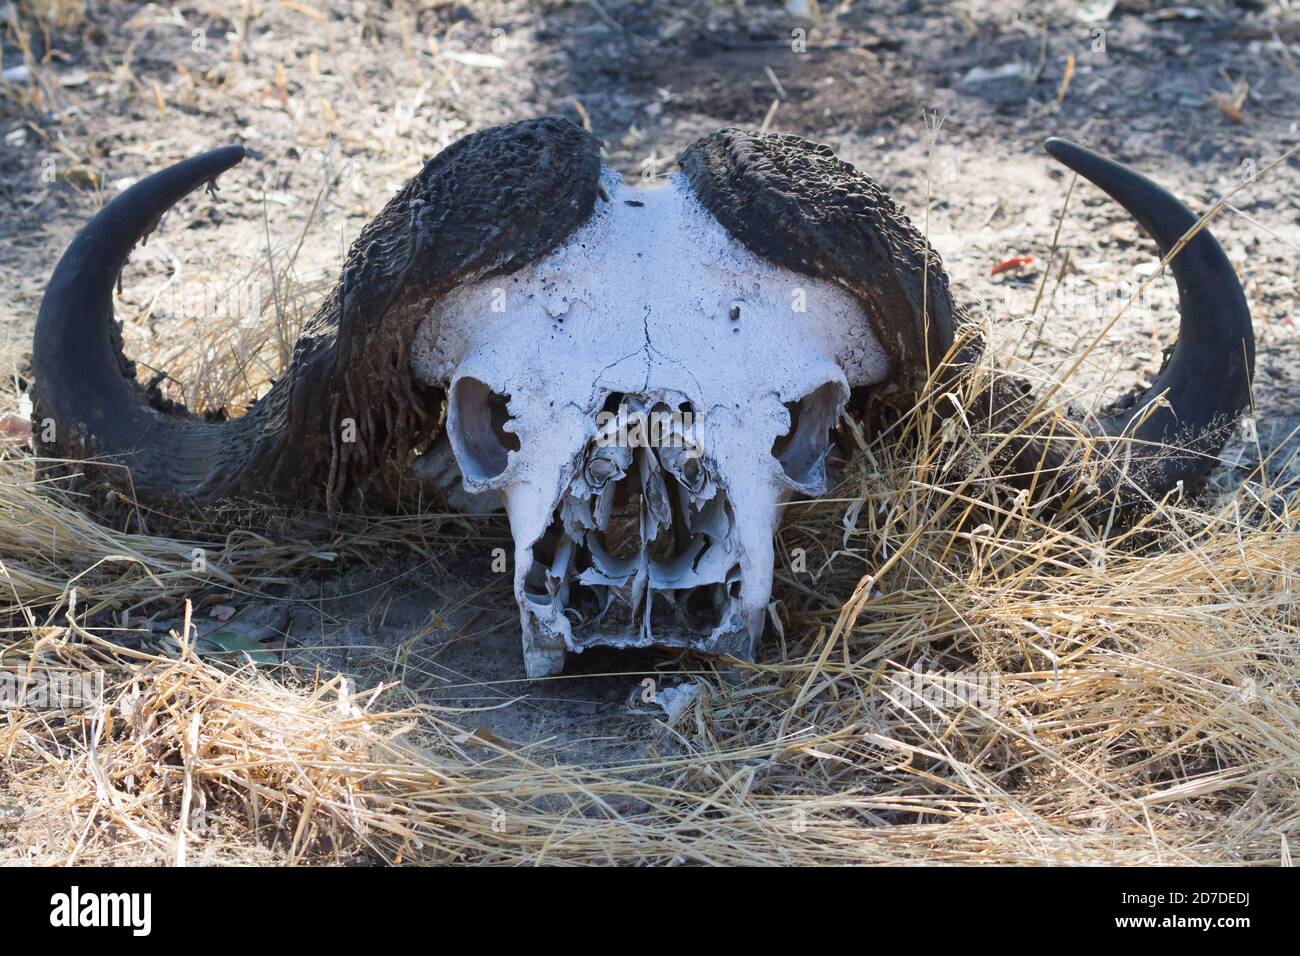 Cape Buffalo (Syncerus caffer) skull on the ground with horns in Mana Pools, Zimbabwe Stock Photo